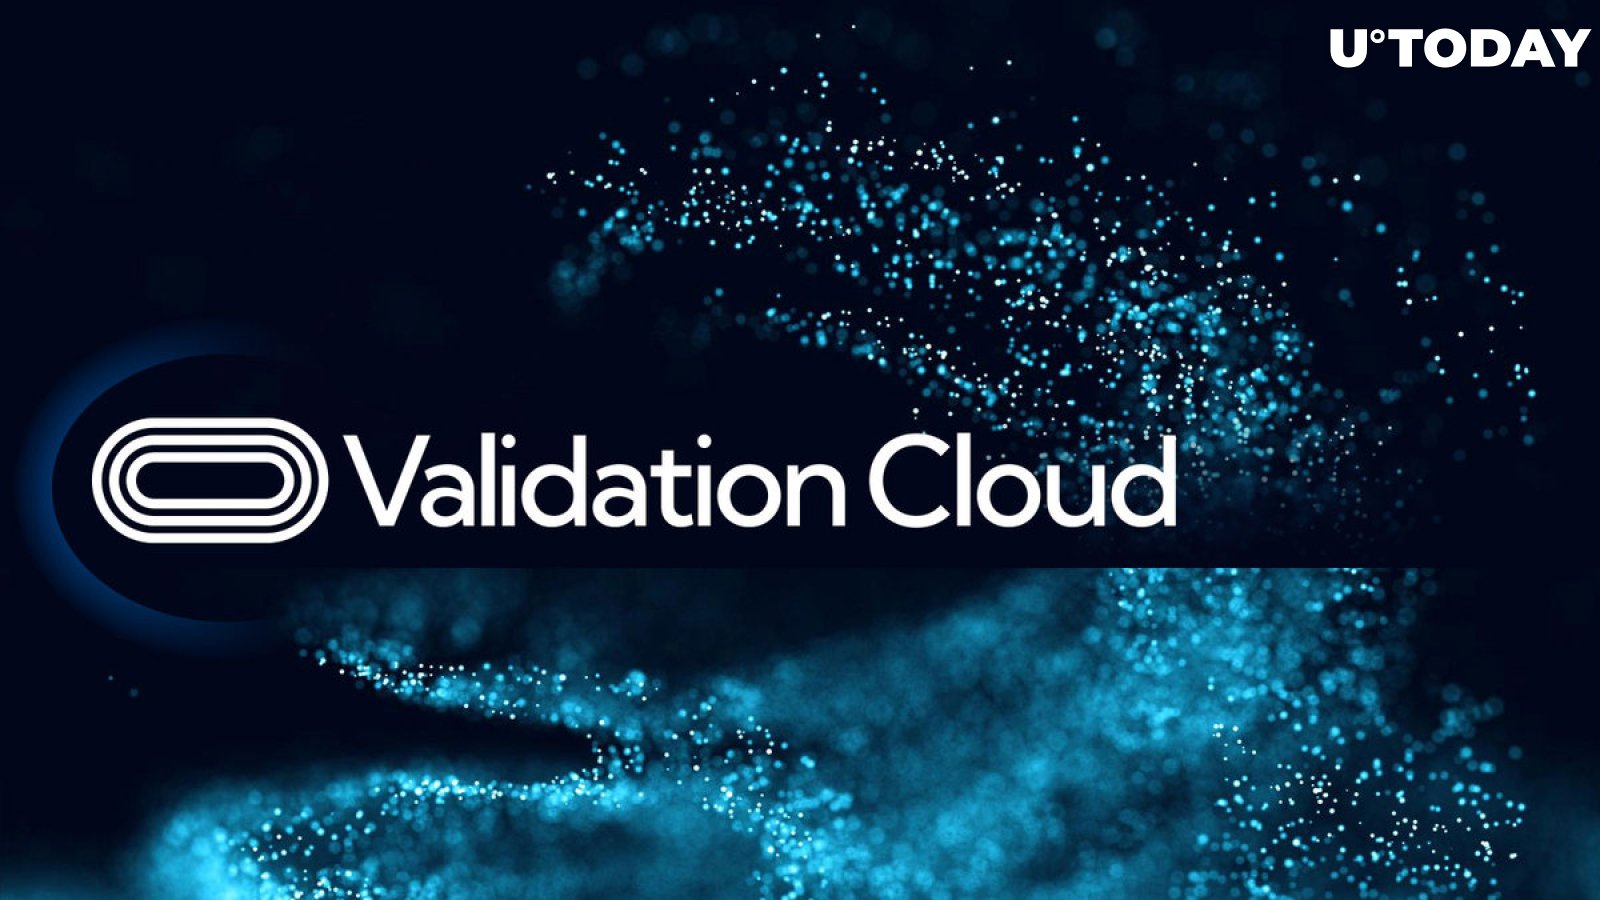 Validation Cloud Launches Staking-as-a-Service Platform for Institutions